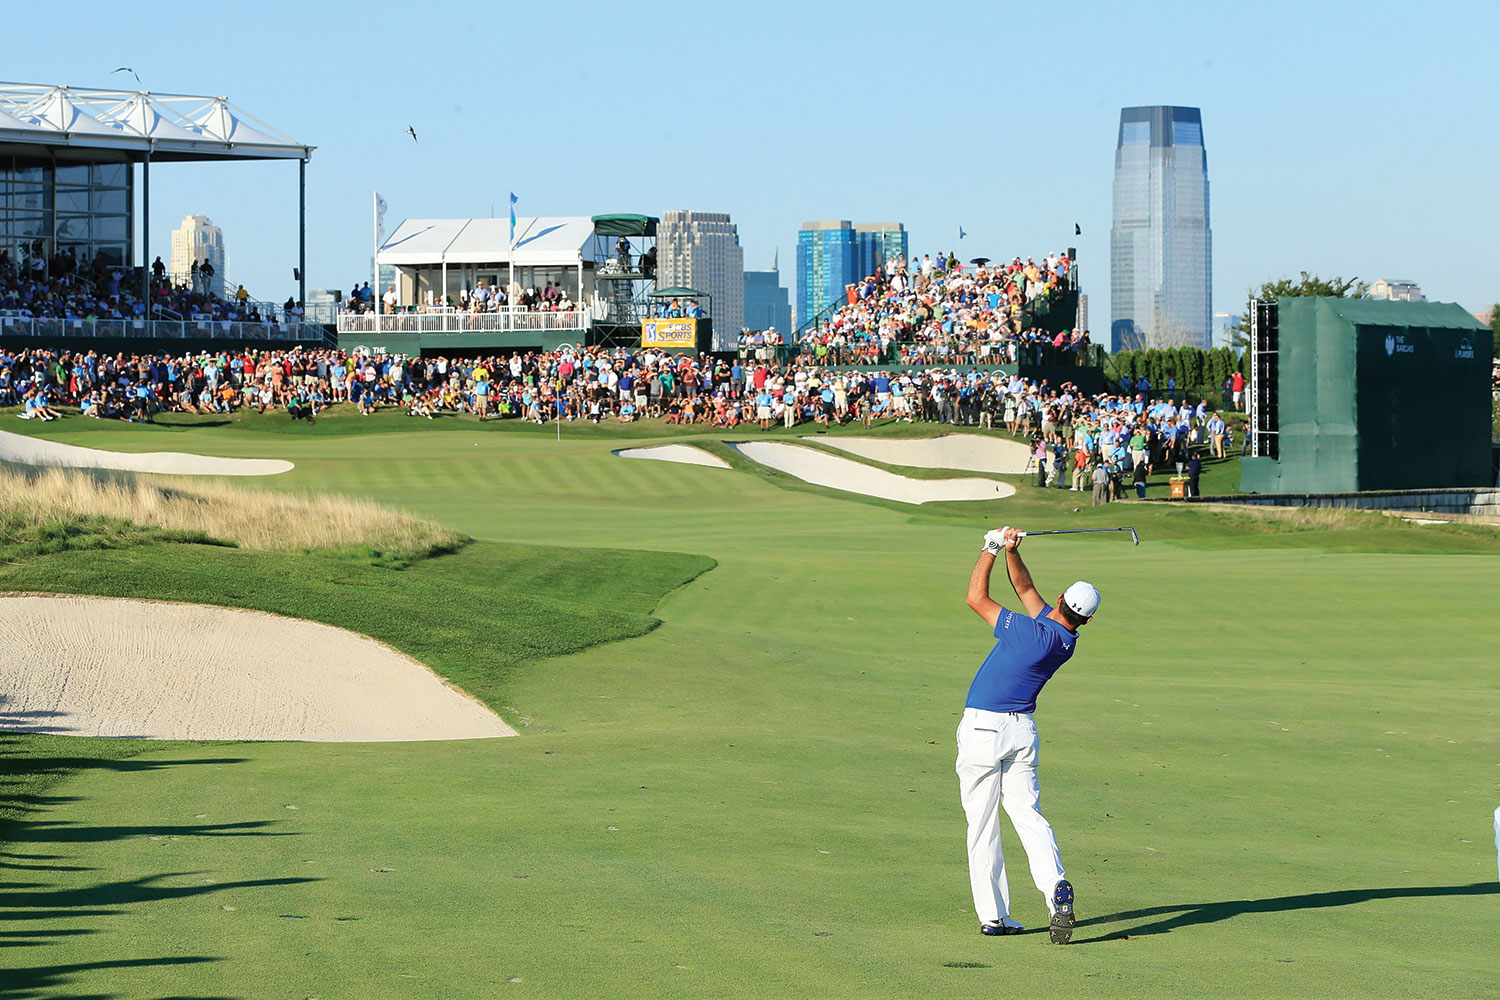 Liberty National held US PGA Tour events in 2009 and 2013.